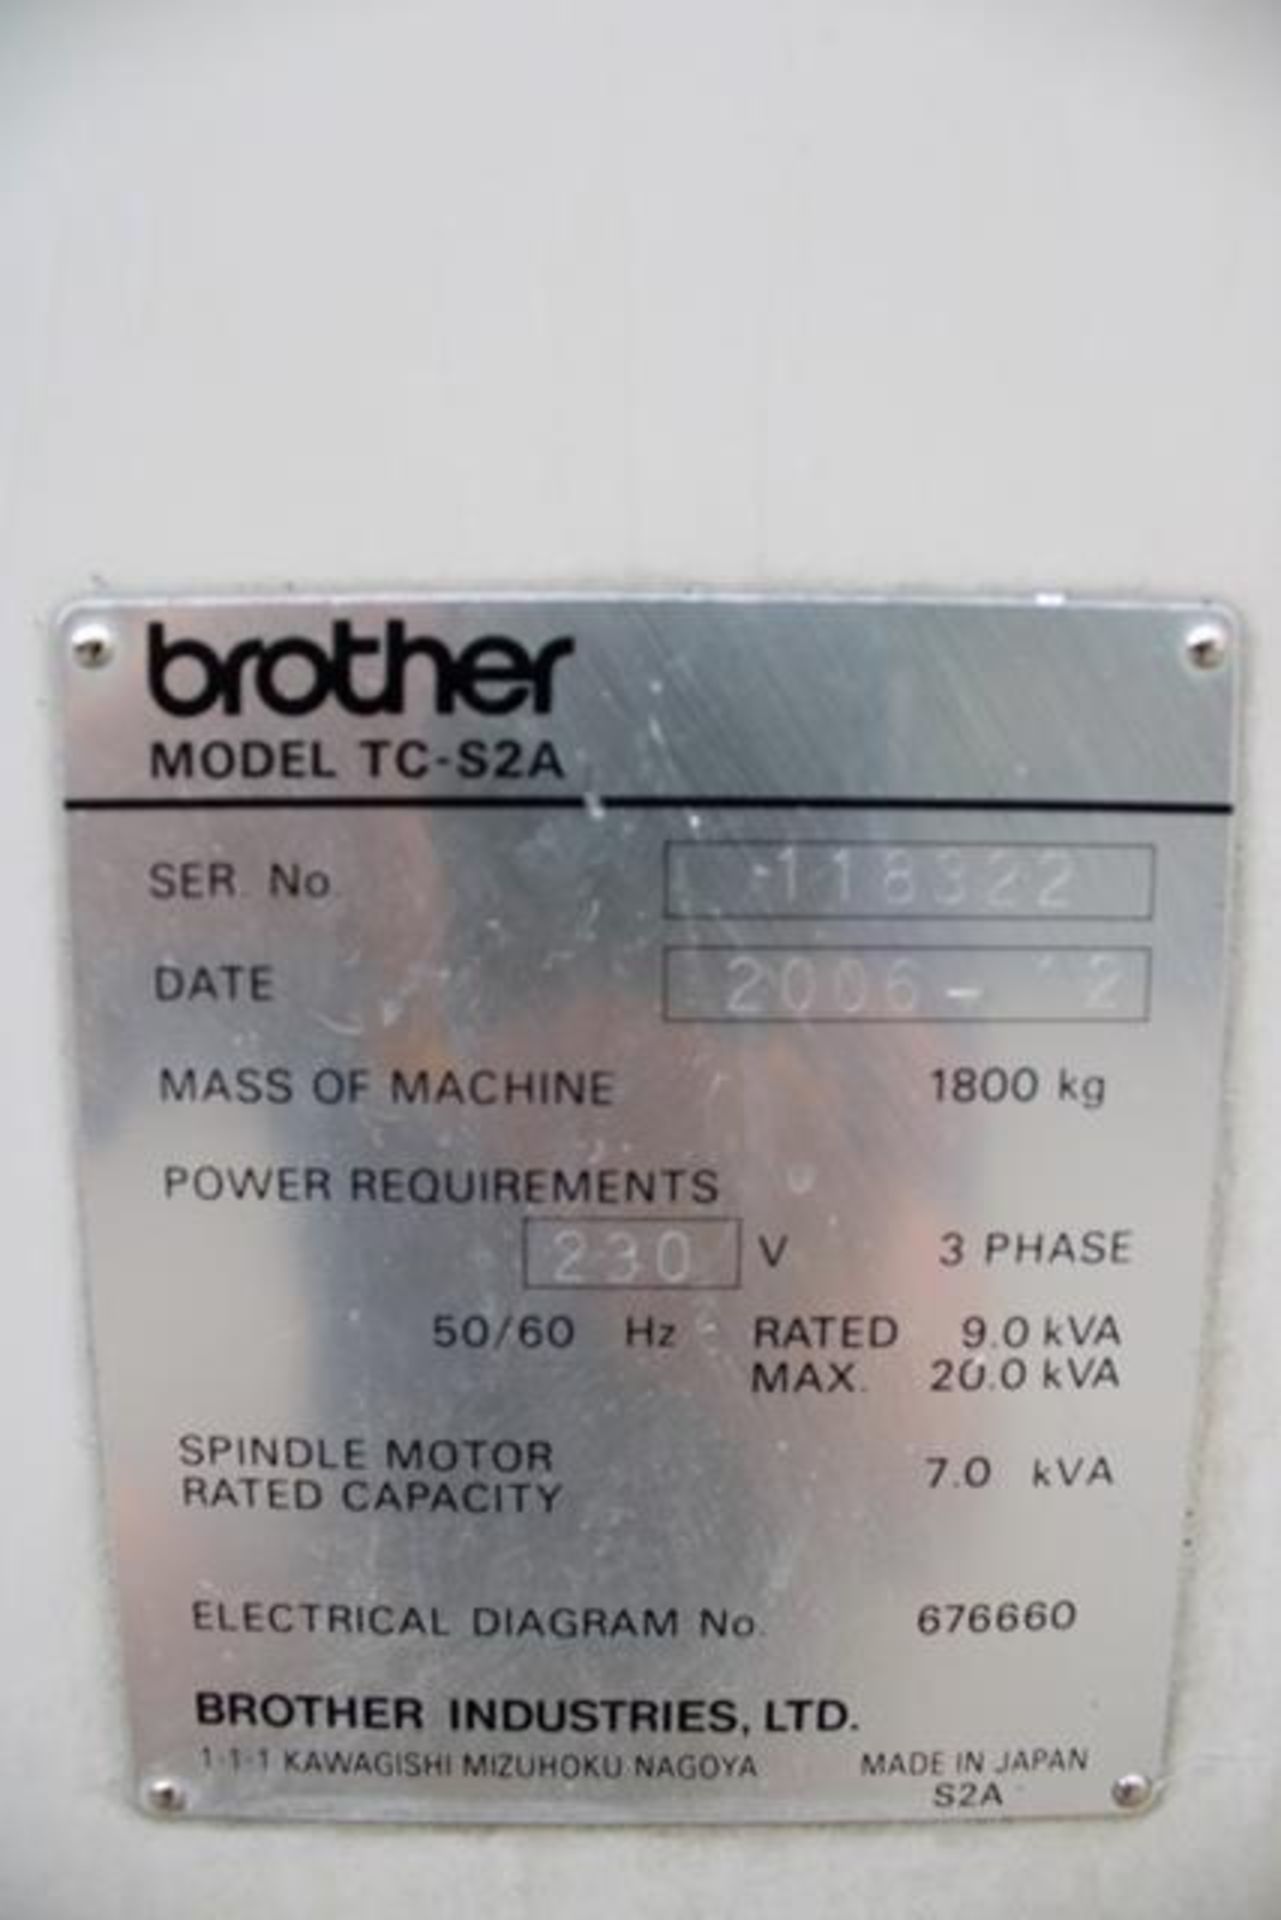 Brother Model TC-S2A 4-Axis CNC Tapping Center - Image 5 of 6